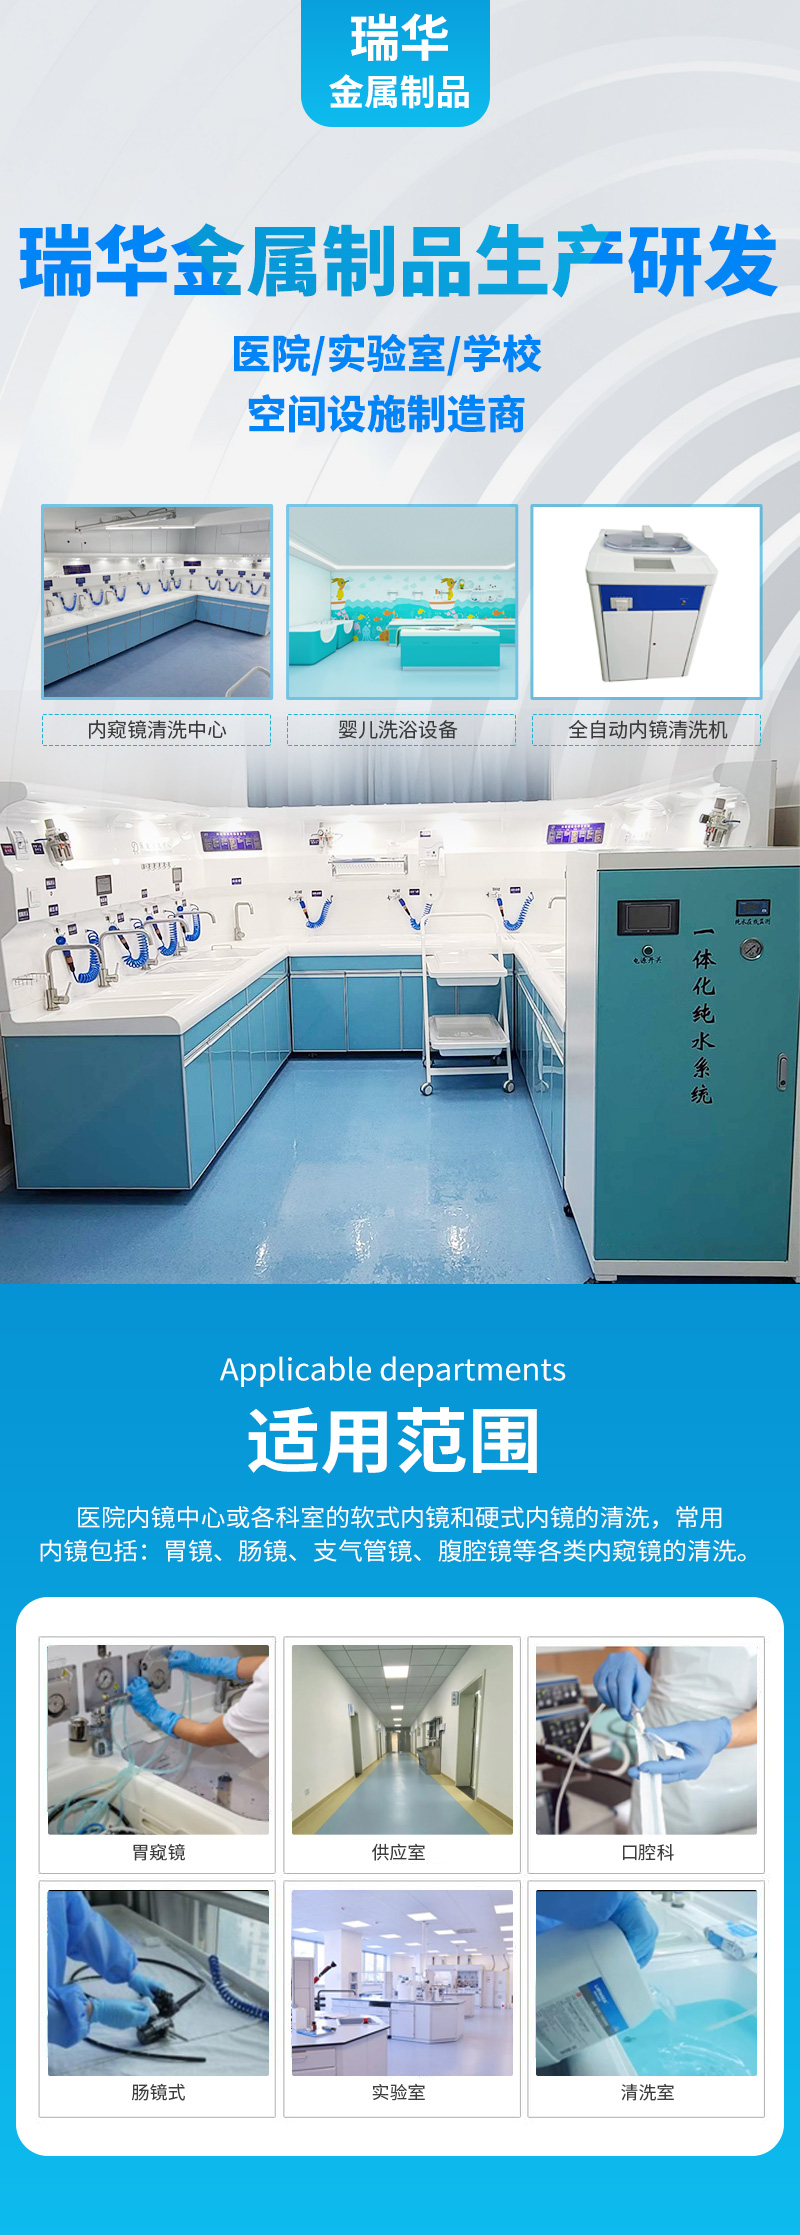 Medical water treatment fully automatic RO reverse osmosis membrane water purifier Hospital supply room laboratory pure water purification equipment